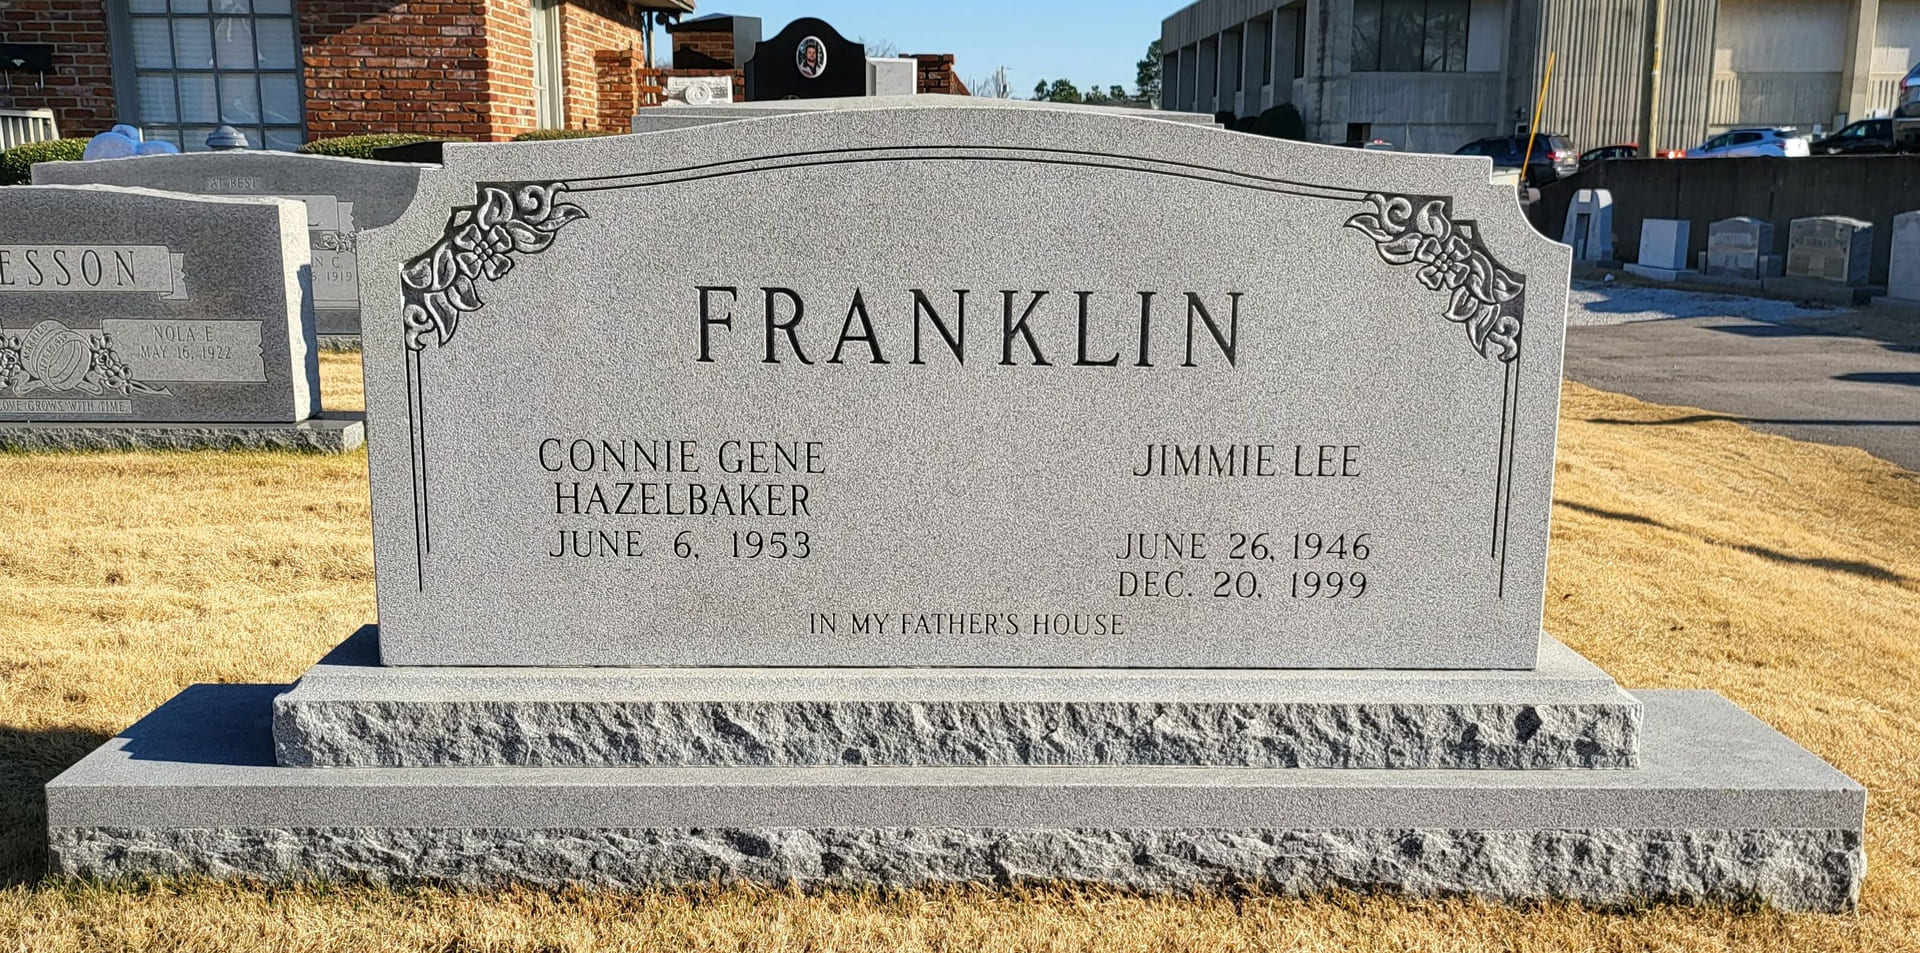 A memorial slab for Connie Gene and Jimmie Lee